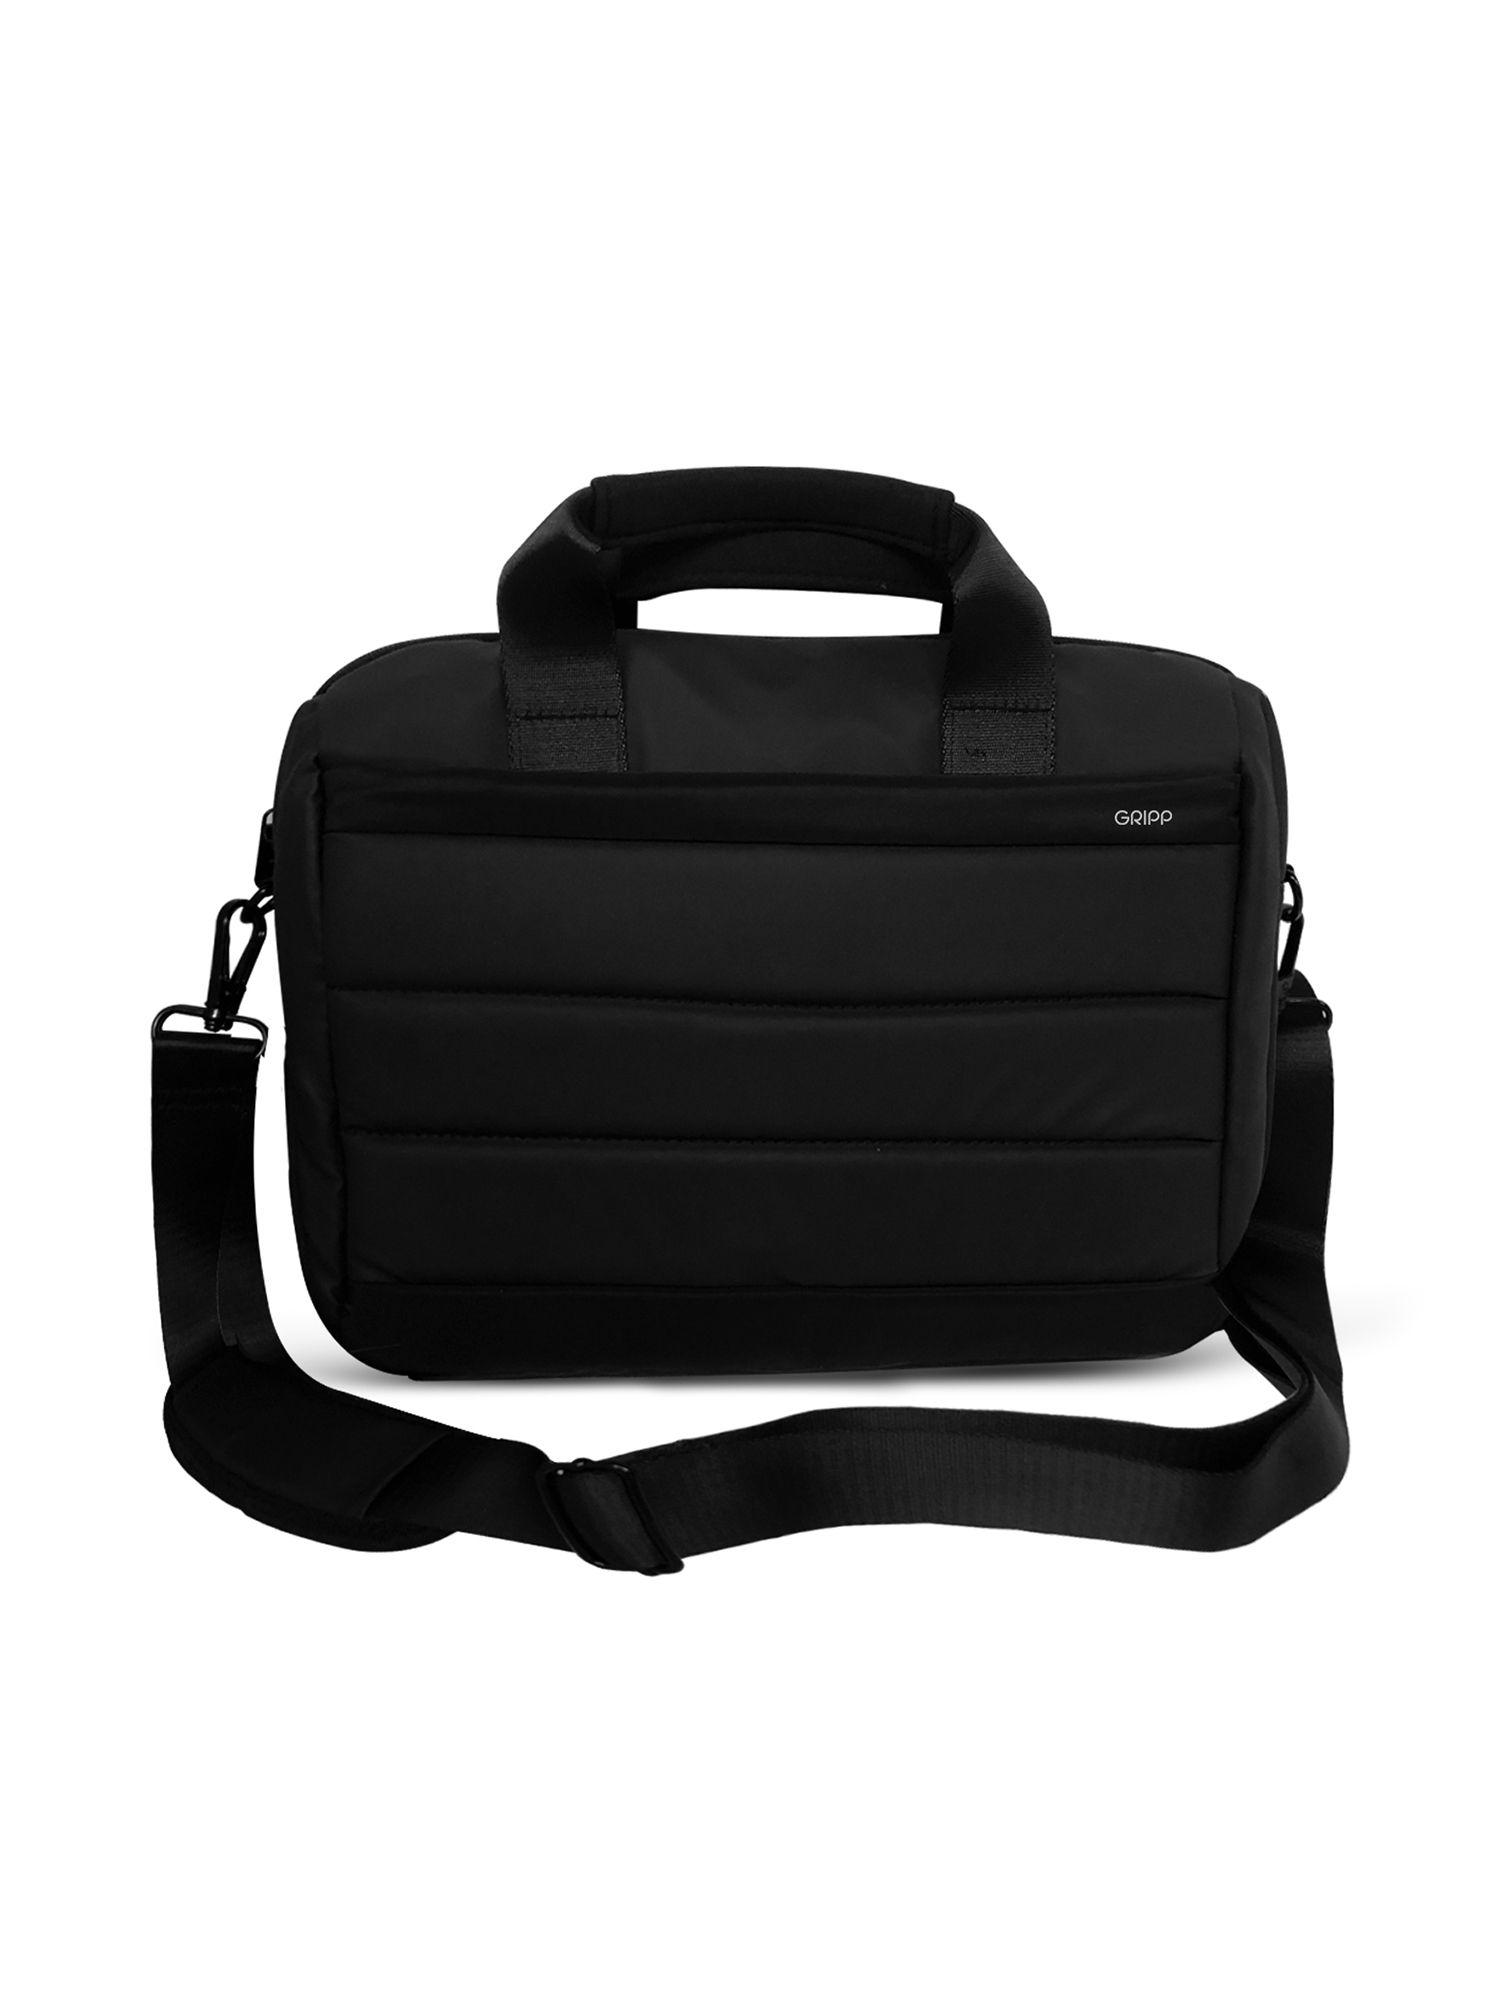 recon executive business topload messenger laptop bag 13.3 inches - black